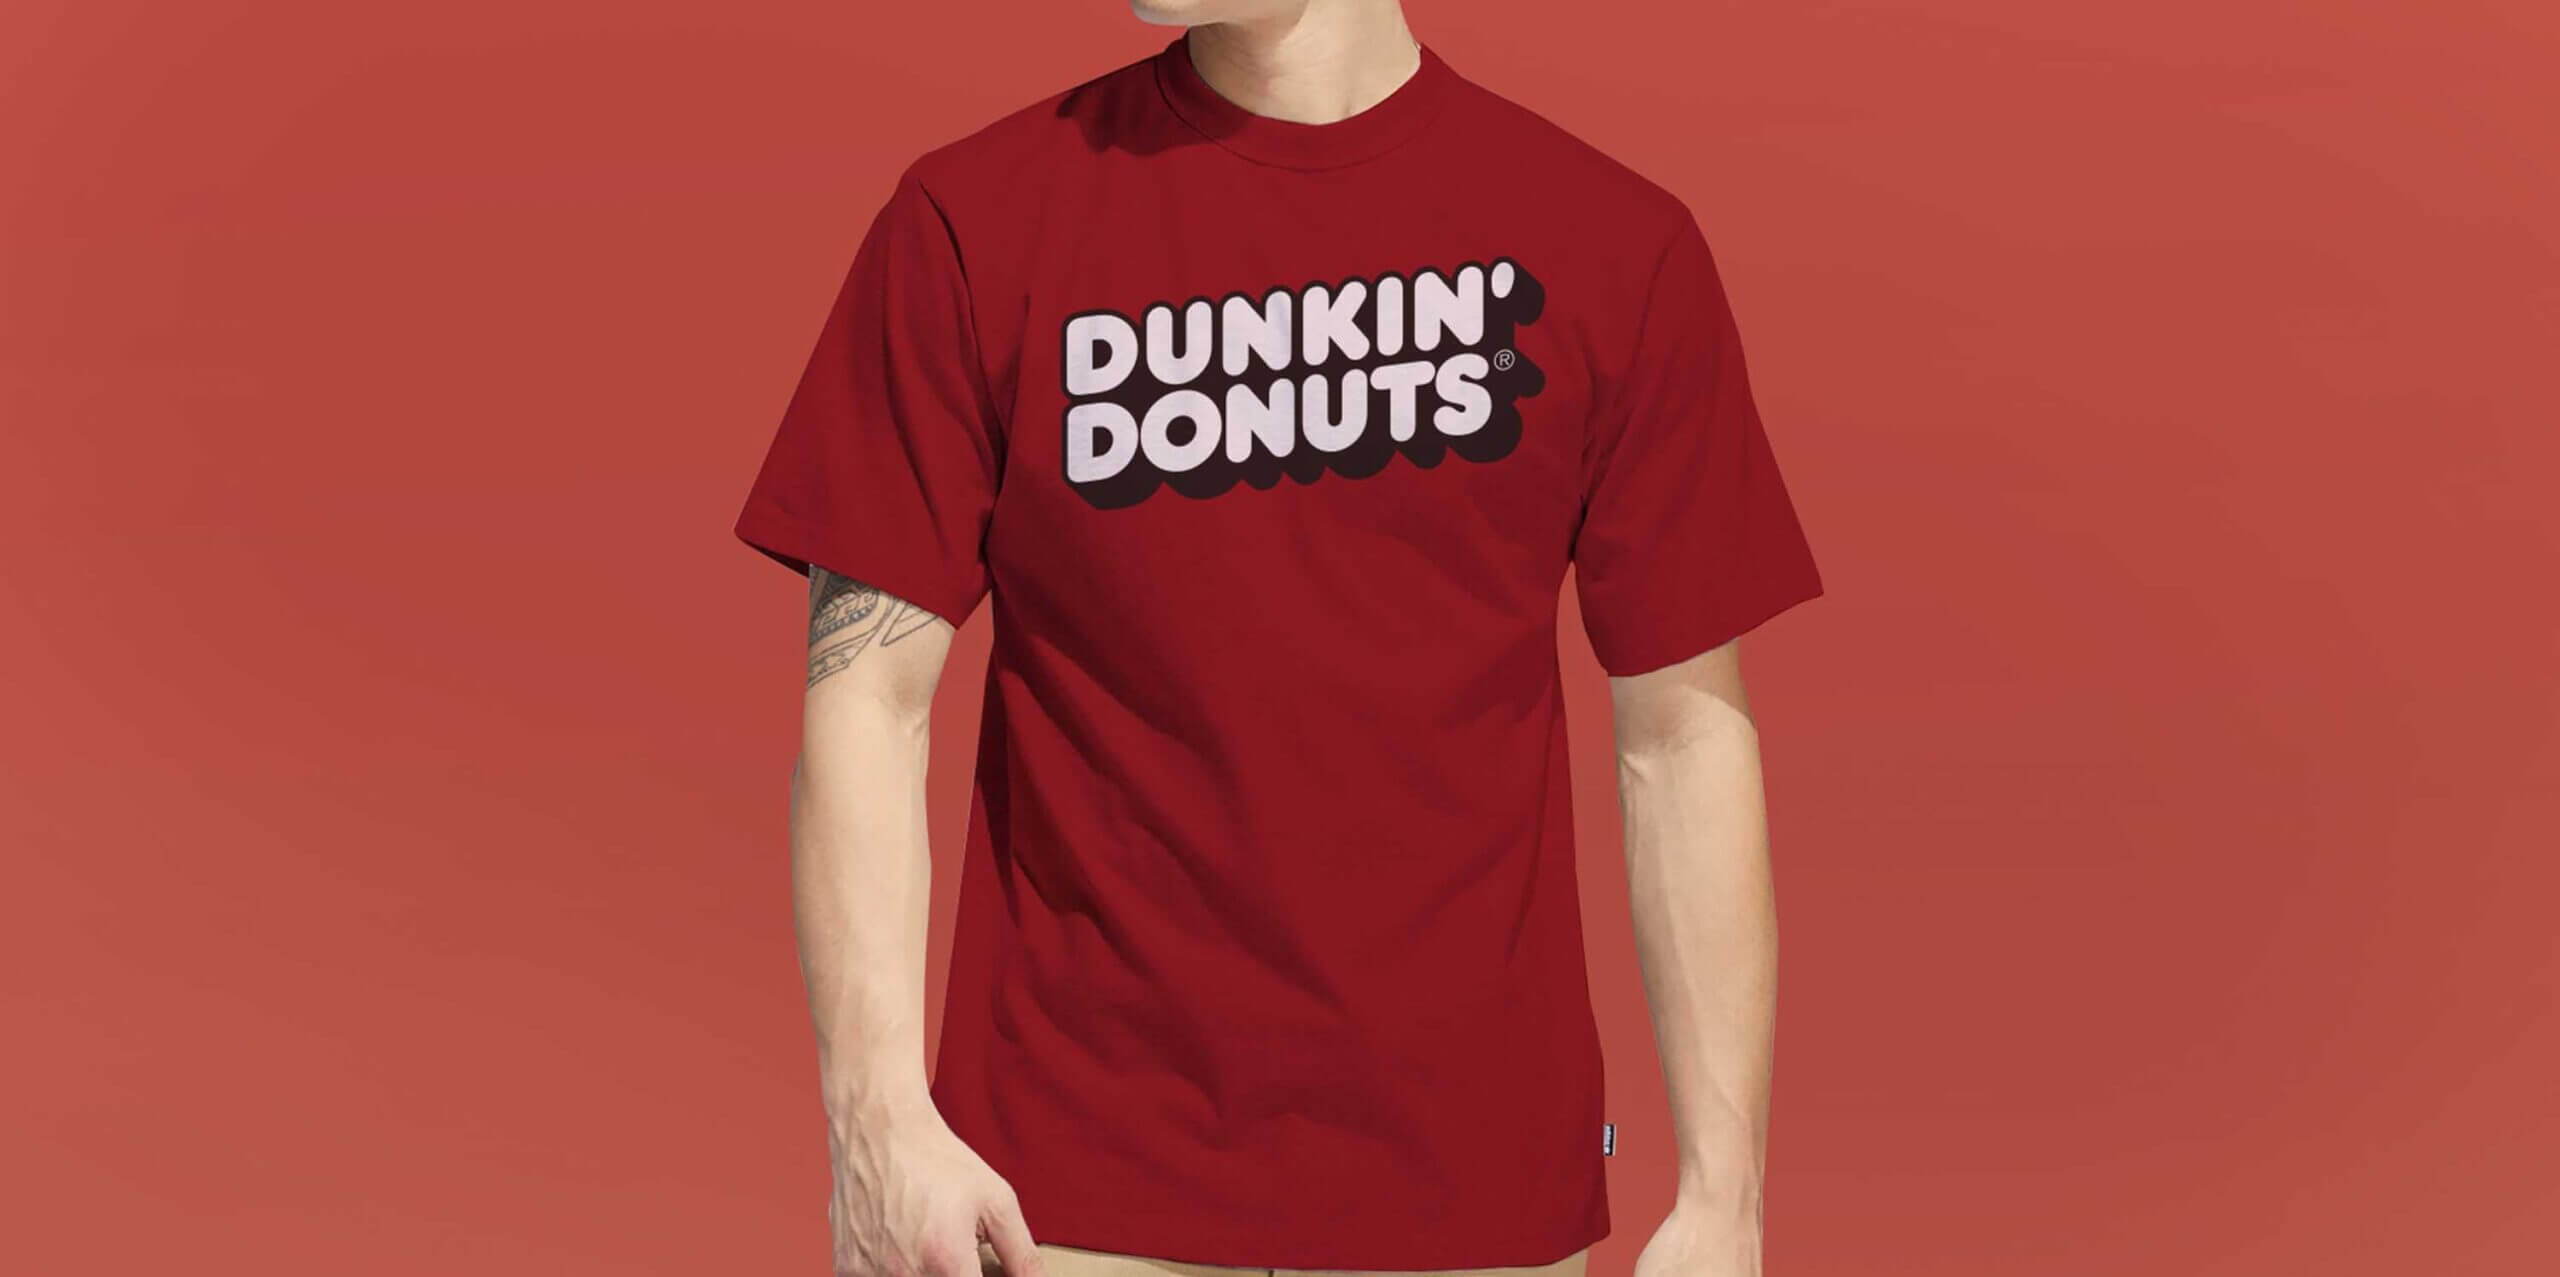 A person in a red Dunkin' Donuts tshirt